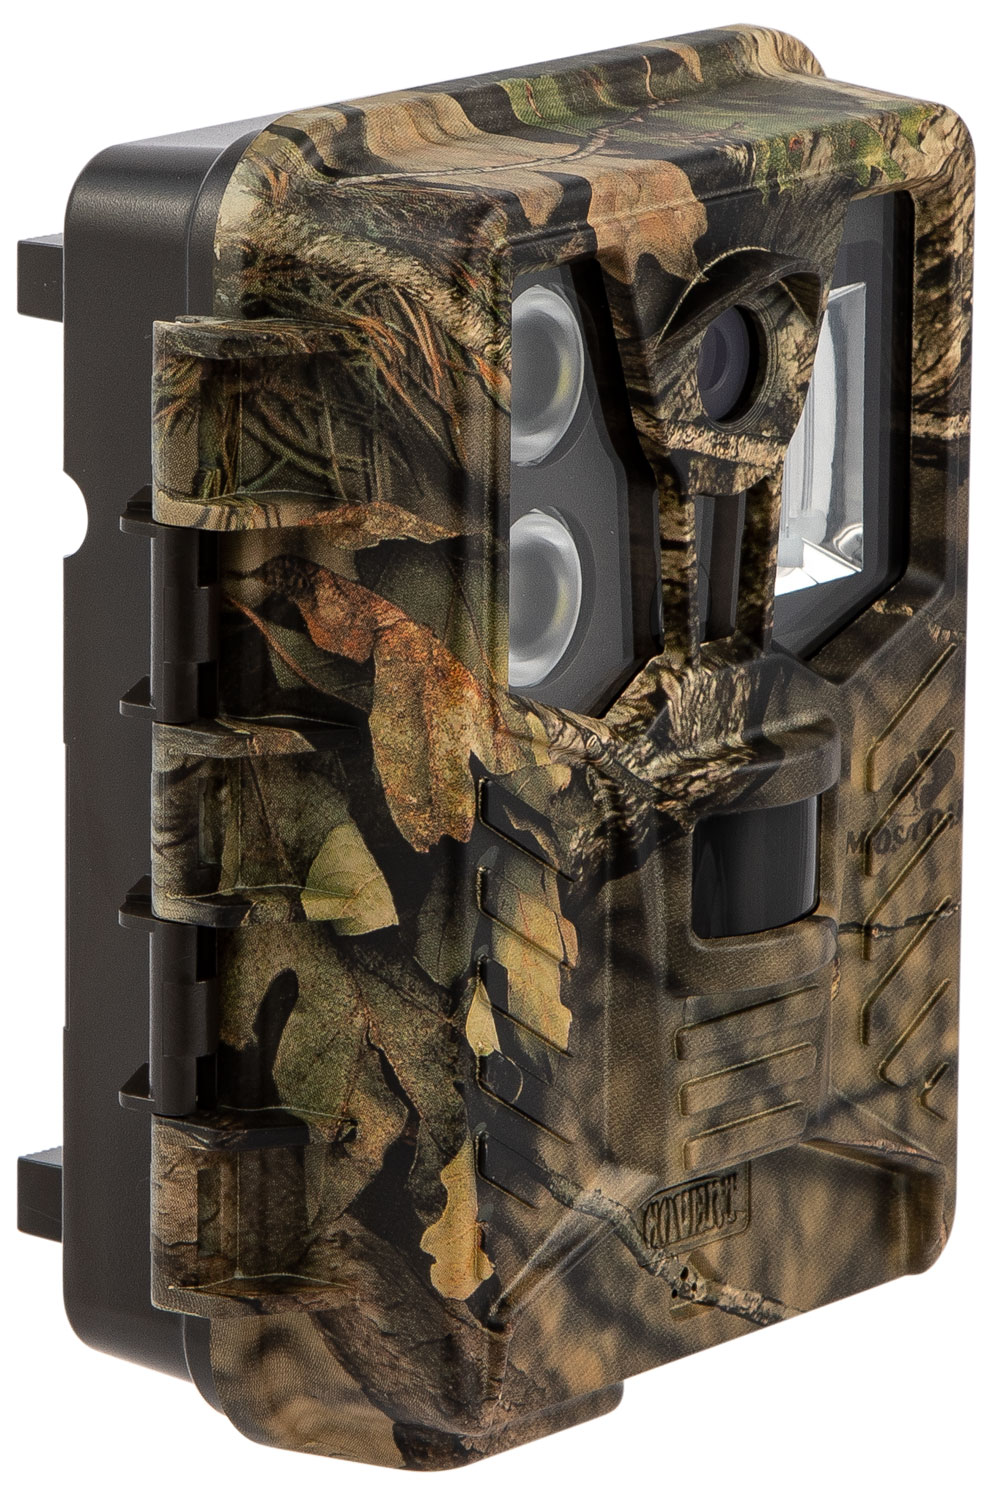 Covert Scouting Cameras 5571 Hollywood  
Trail Camera 18 MP Mossy Oak Break-Up Country